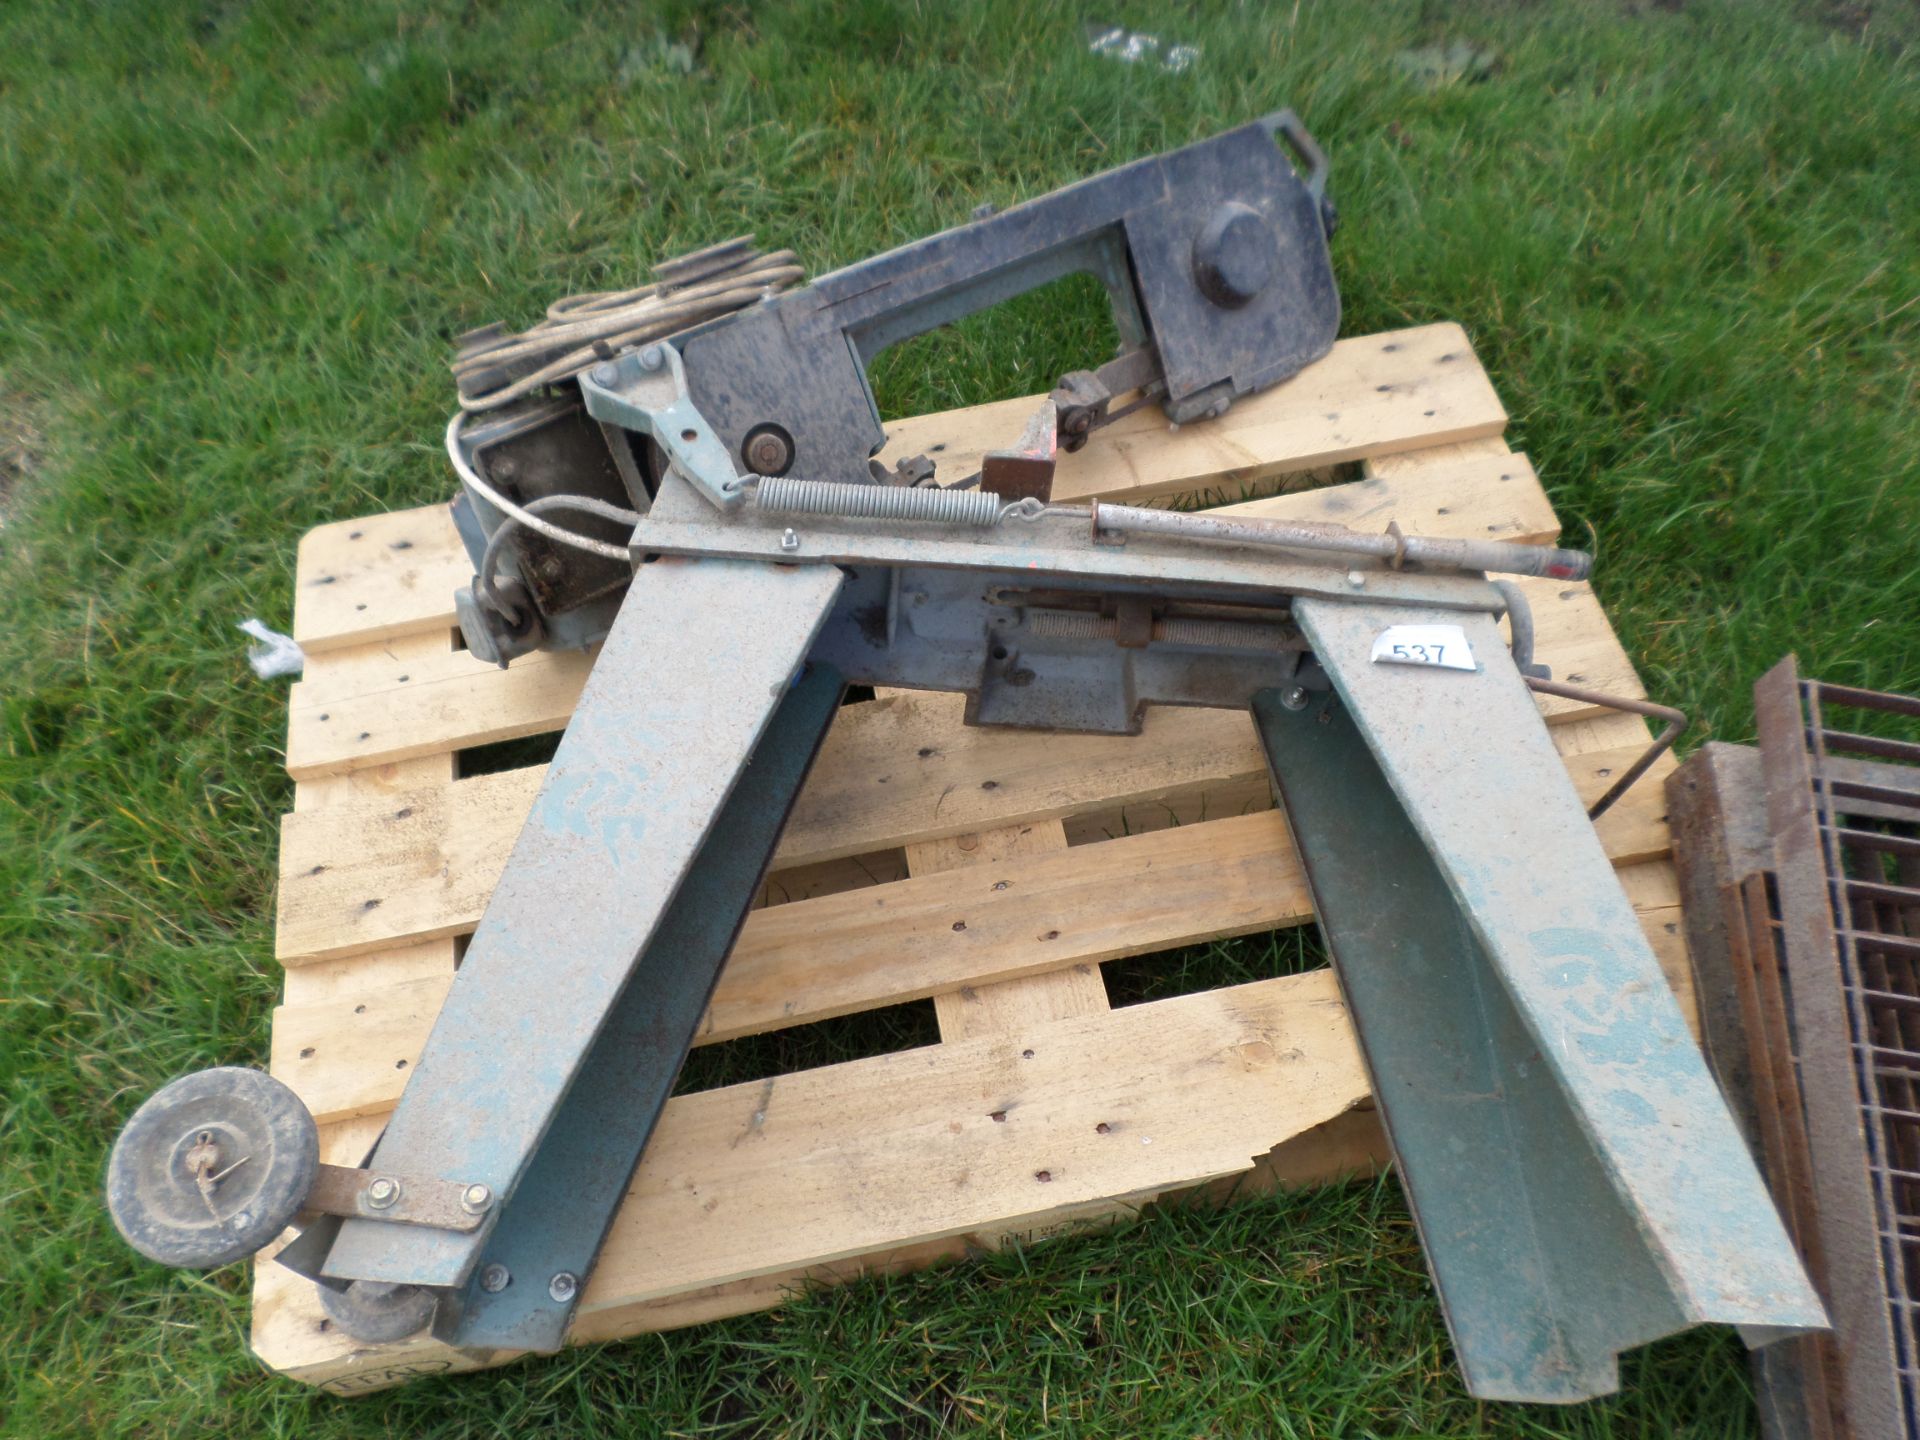 Electric band saw